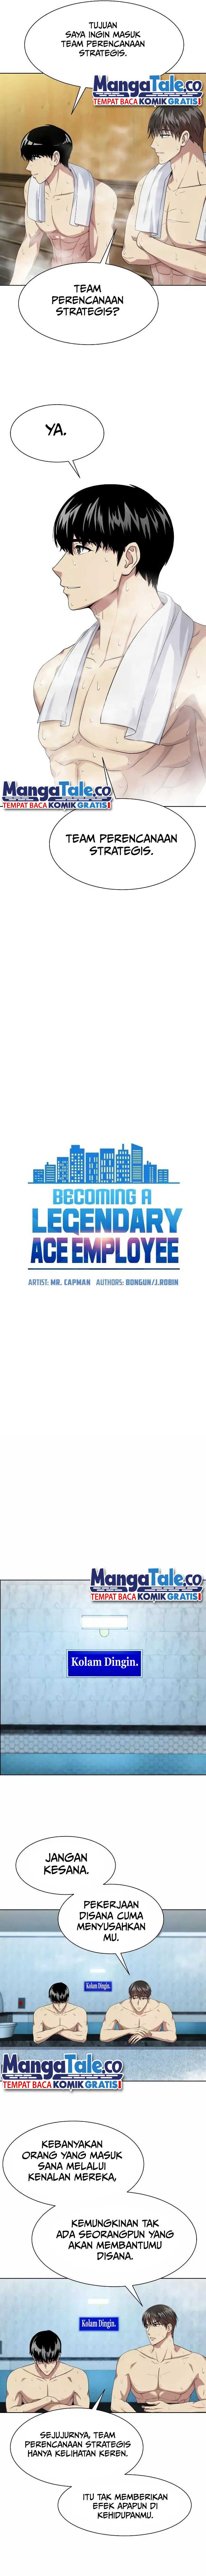 Becoming a Legendary Ace Employee Chapter 23